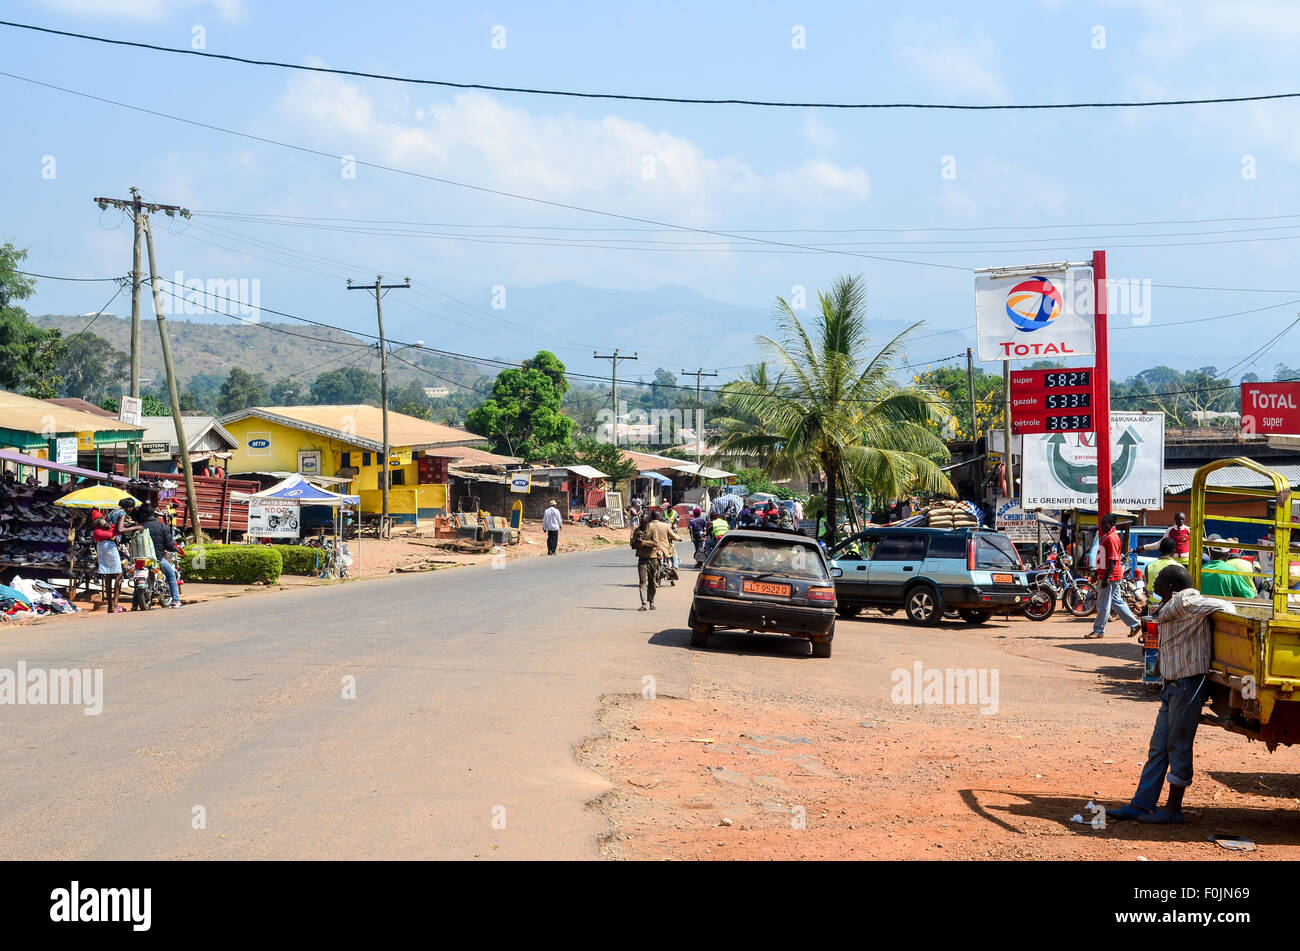 Main street of Ndop a small town in Cameroon with a Total petrol station Stock Photo